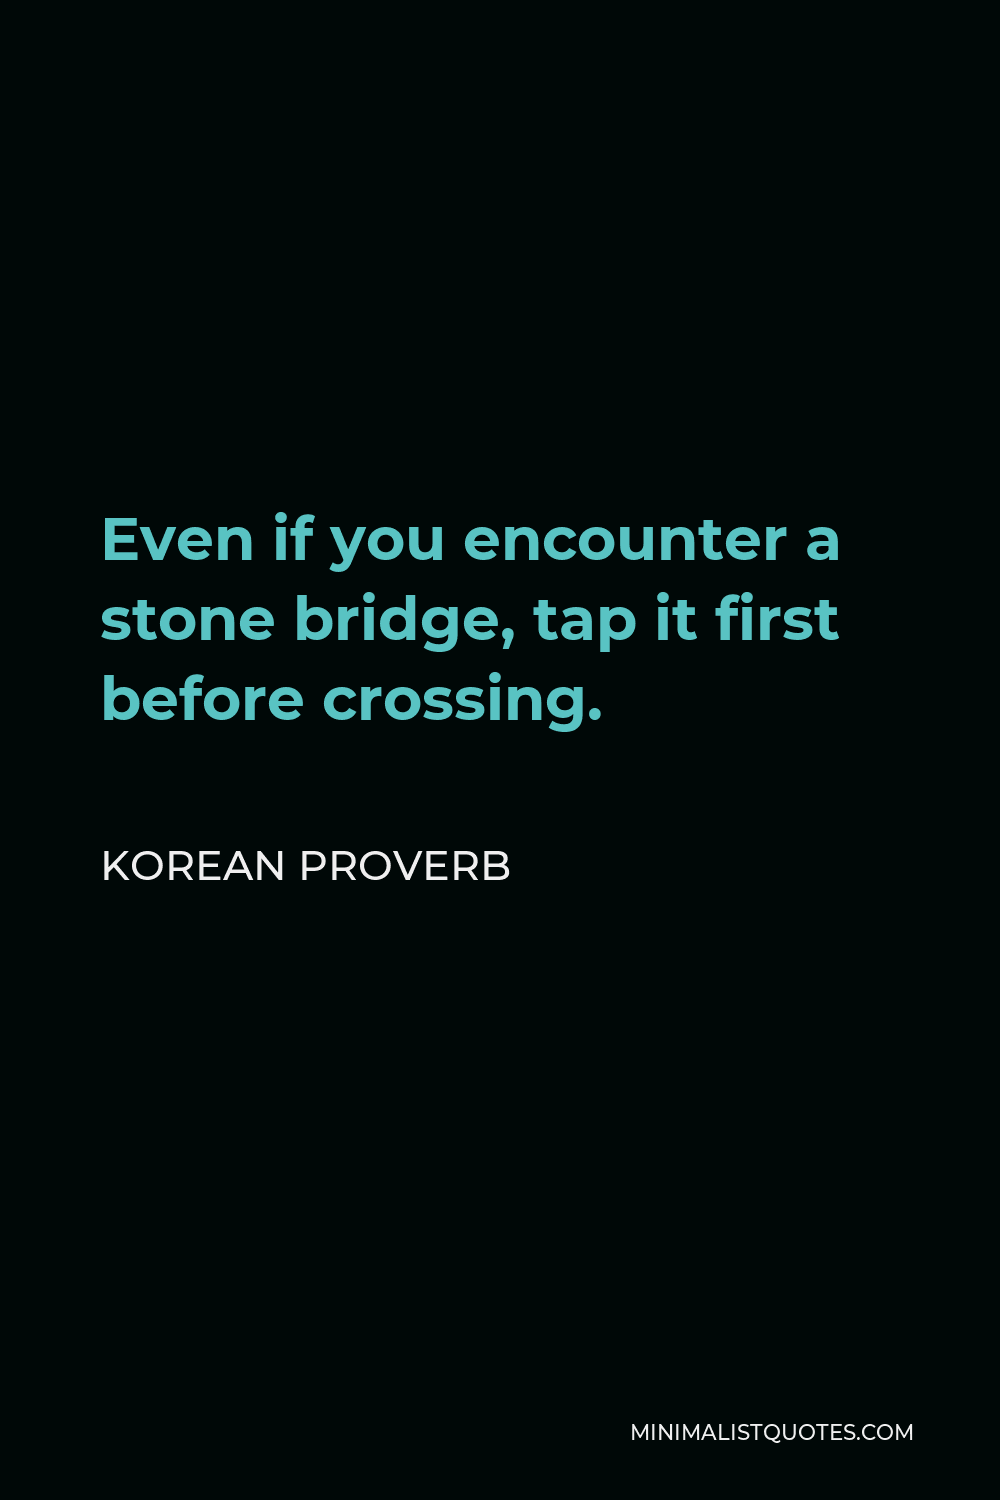 Korean Proverb Quote - Even if you encounter a stone bridge, tap it first before crossing.